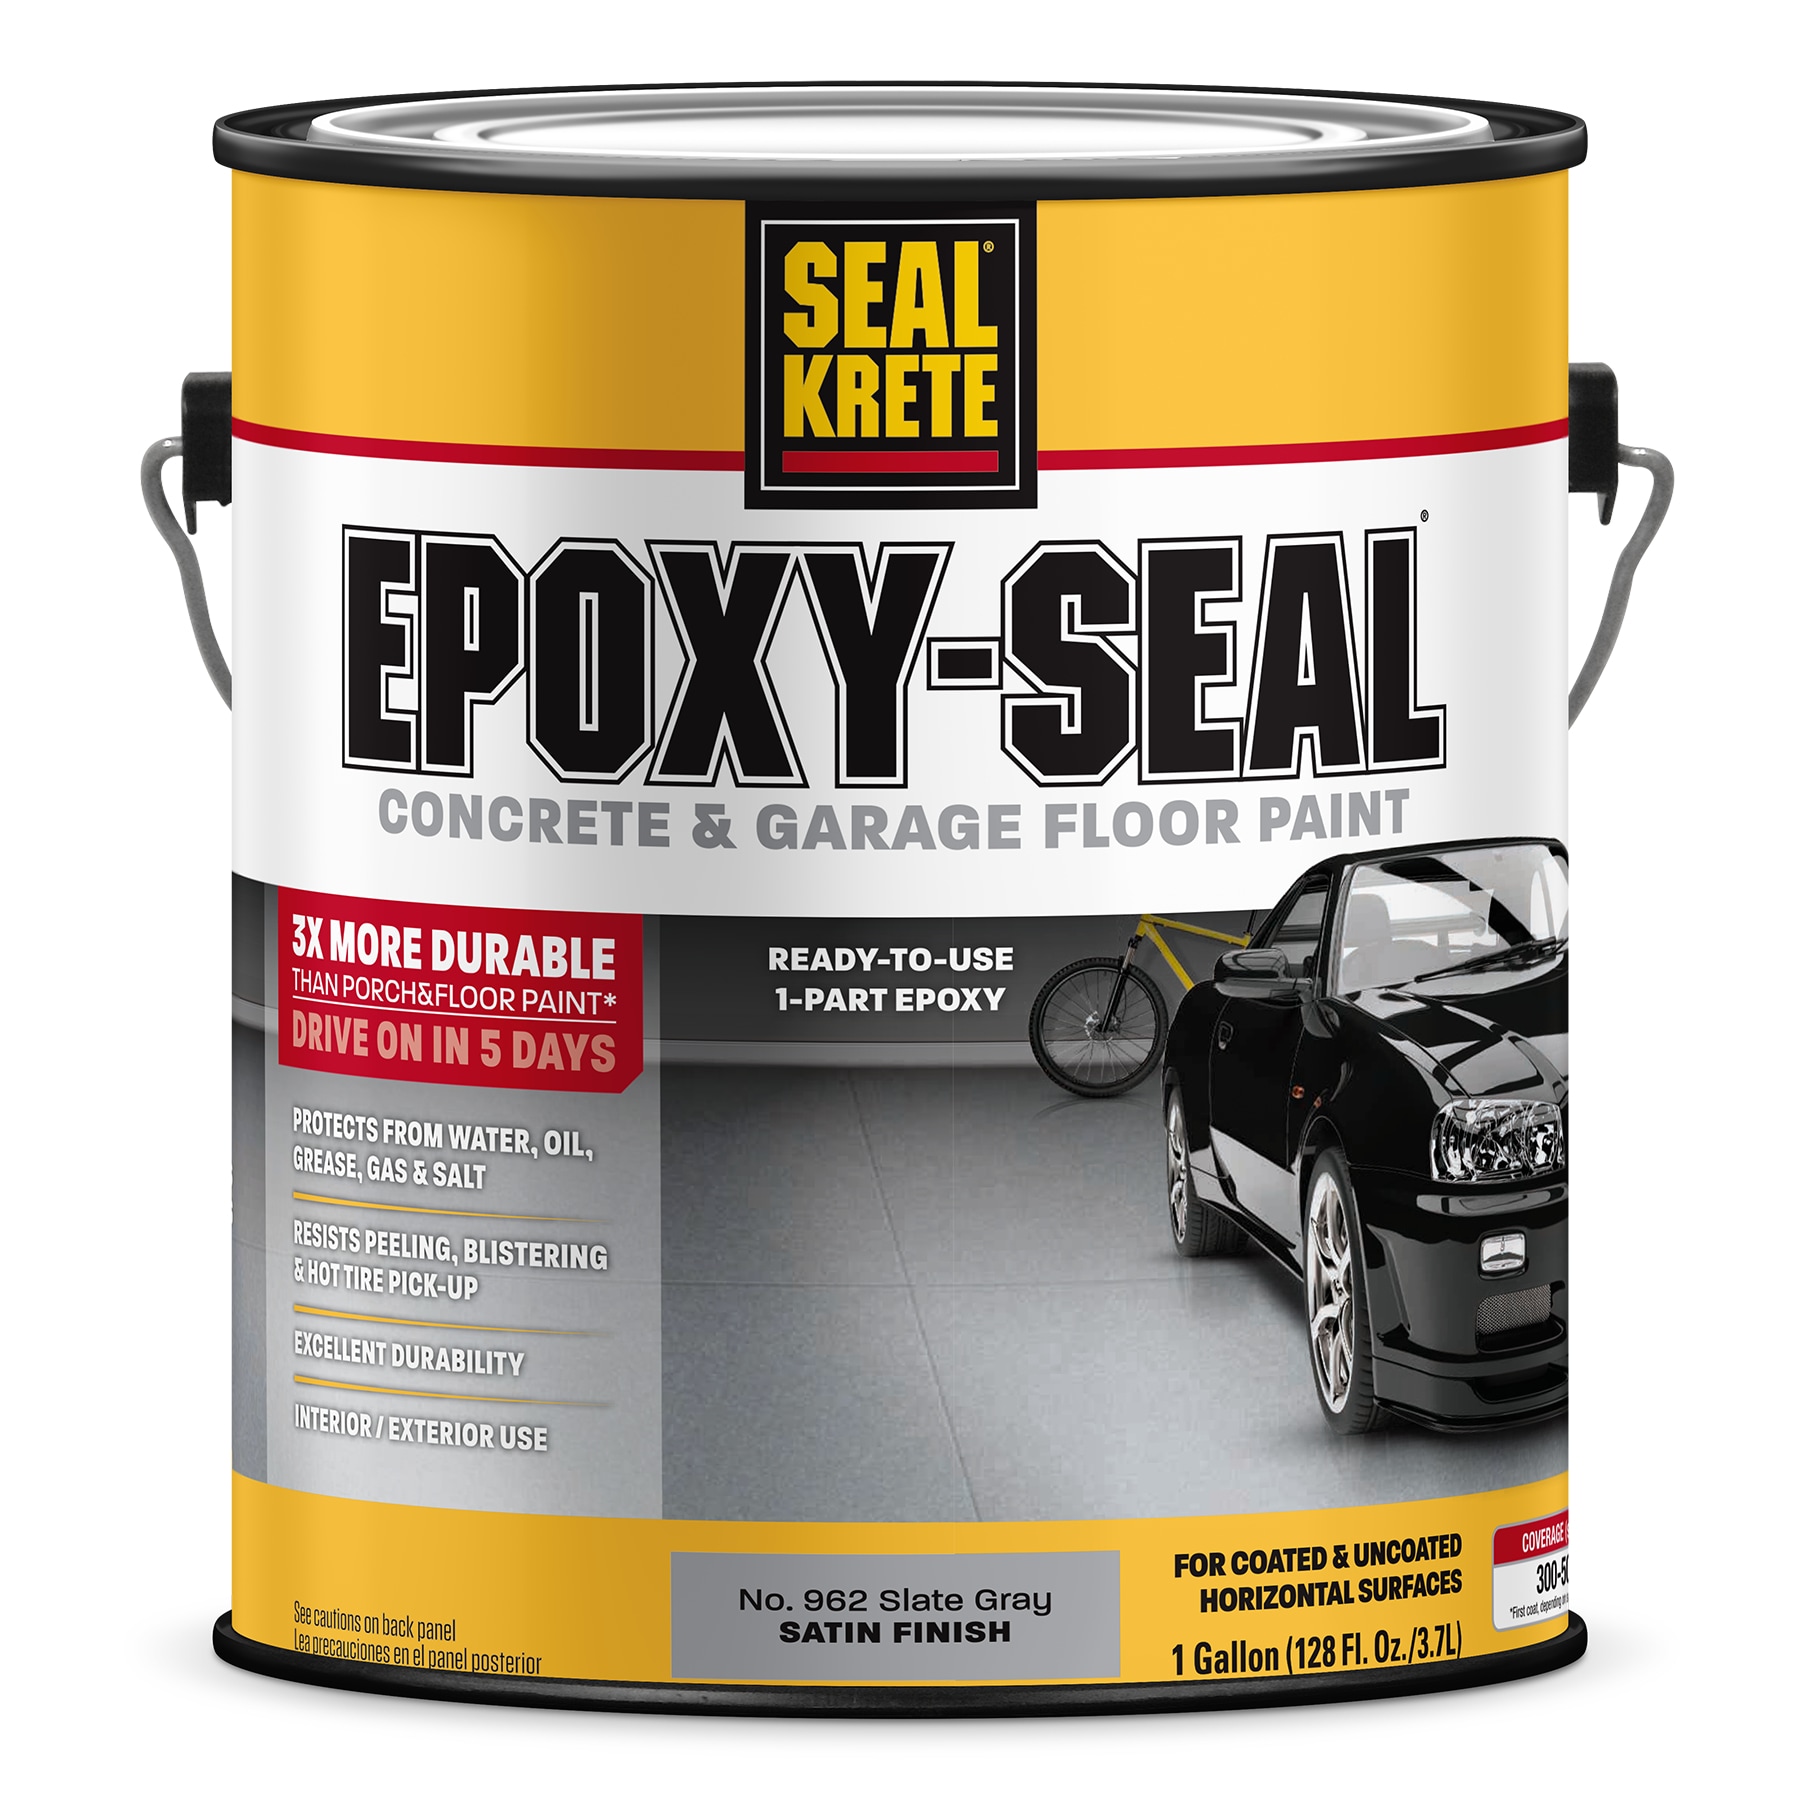 Garage Floor Epoxy: How to Do it Yourself - Plank and Pillow